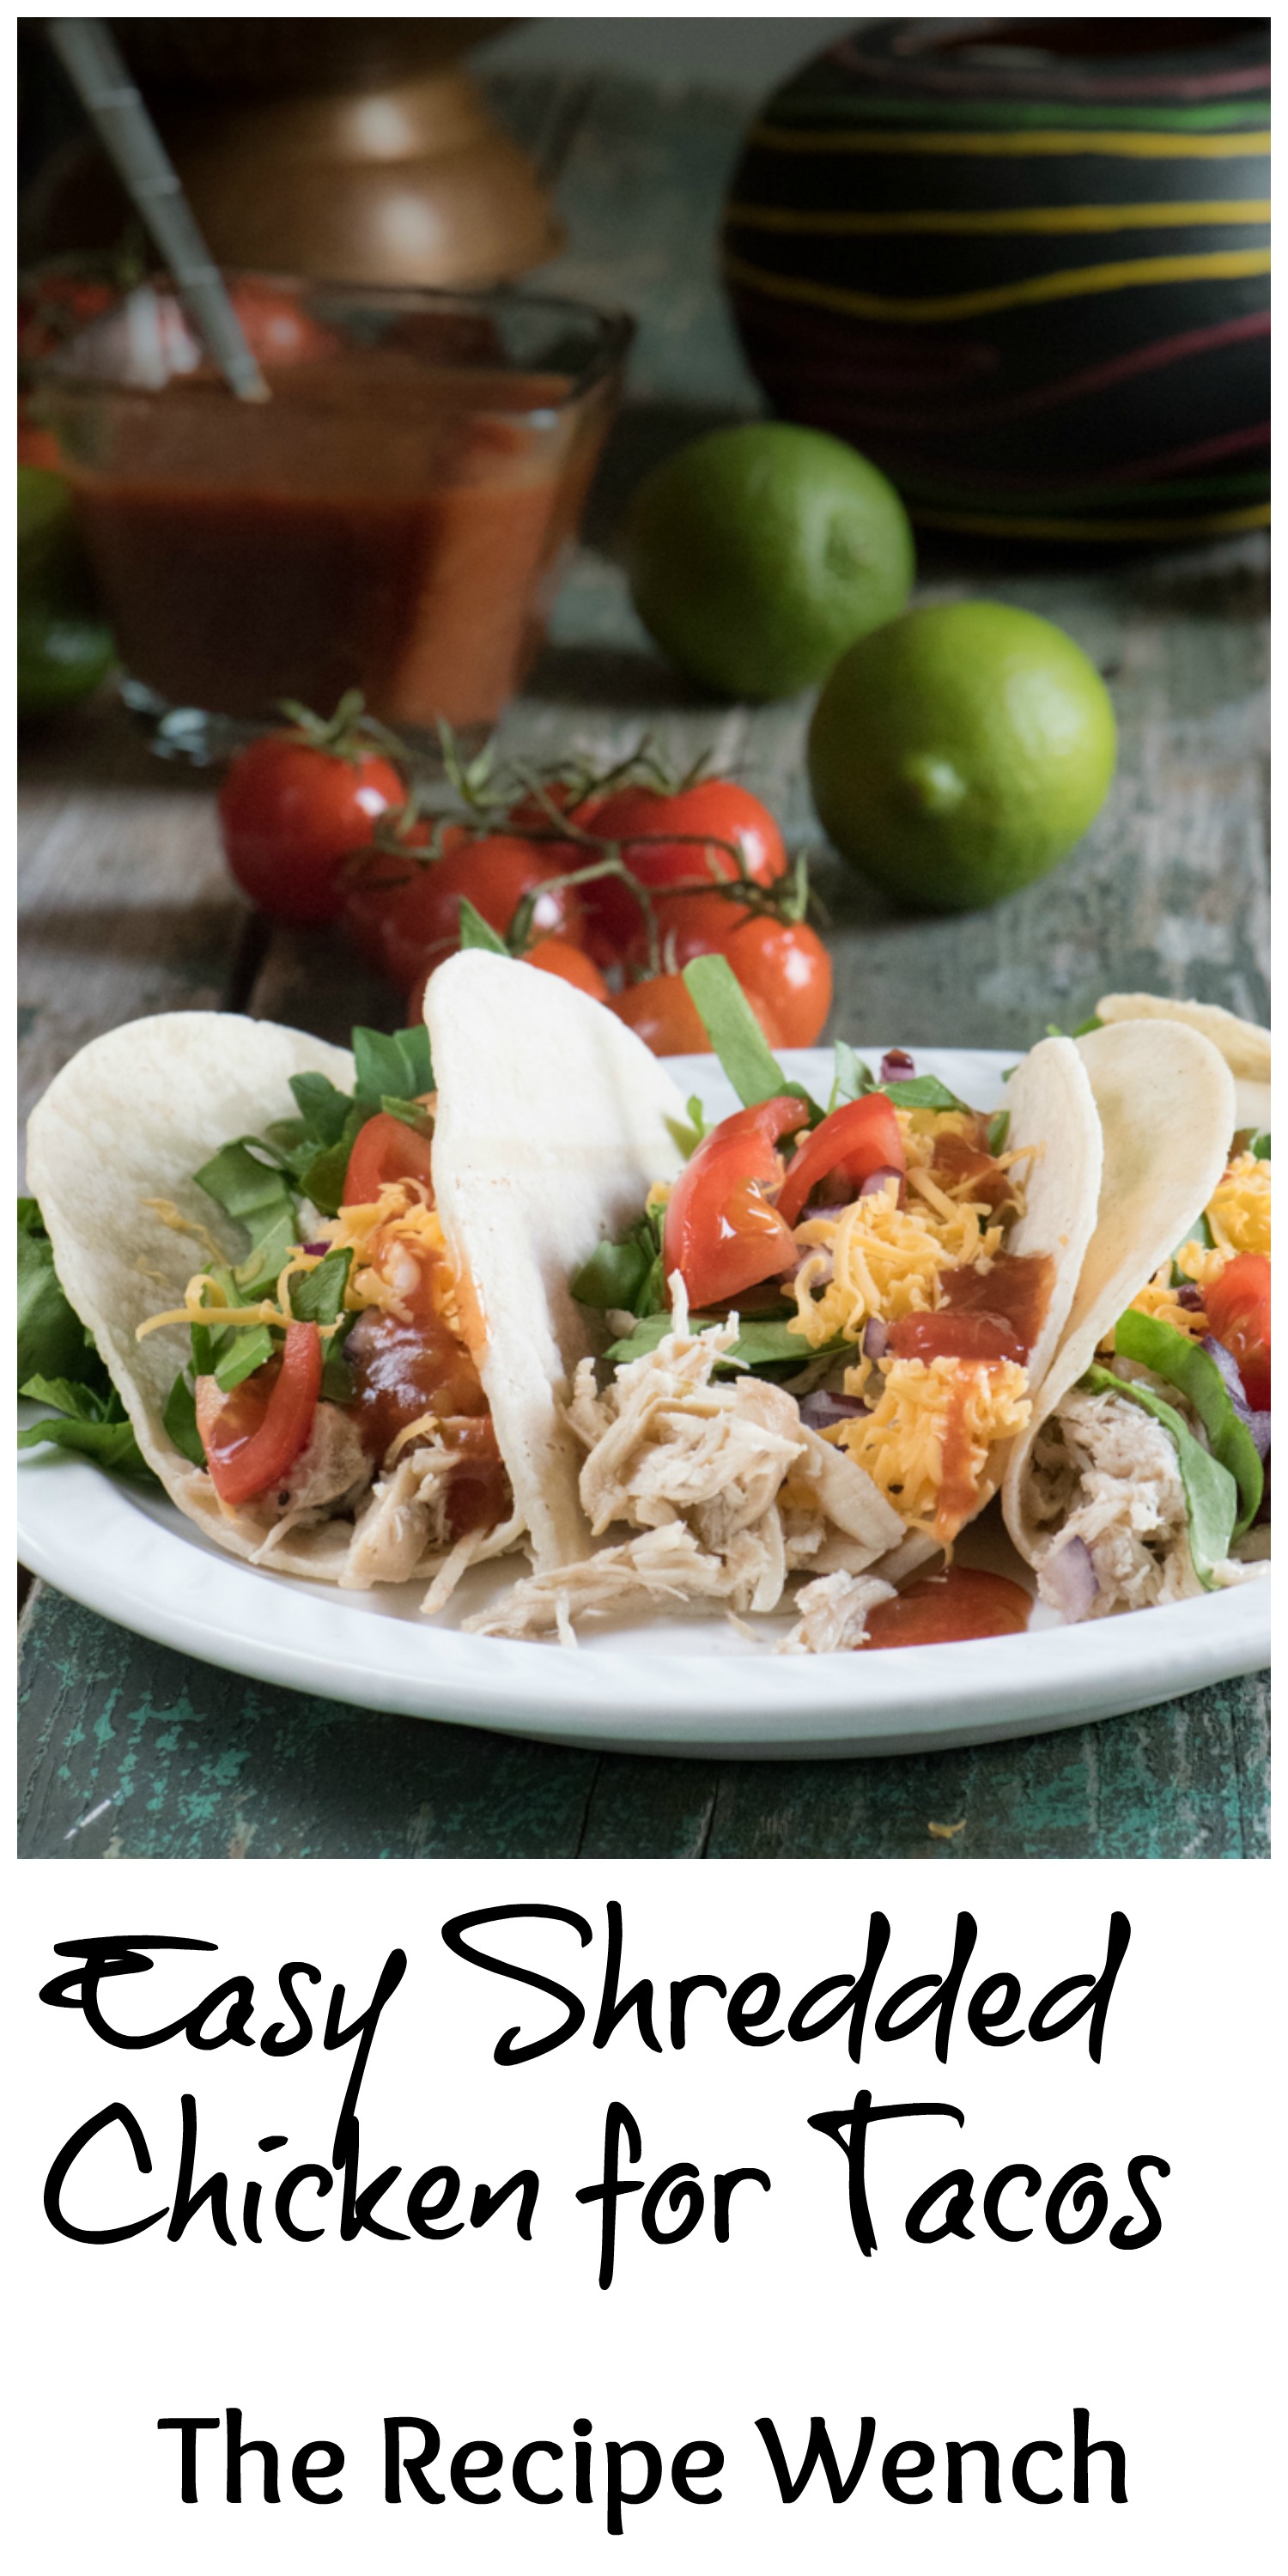 You won't believe this easy shredded chicken recipe. Make extra and store for those hectic last-minute dinners. I do! | The Recipe Wench